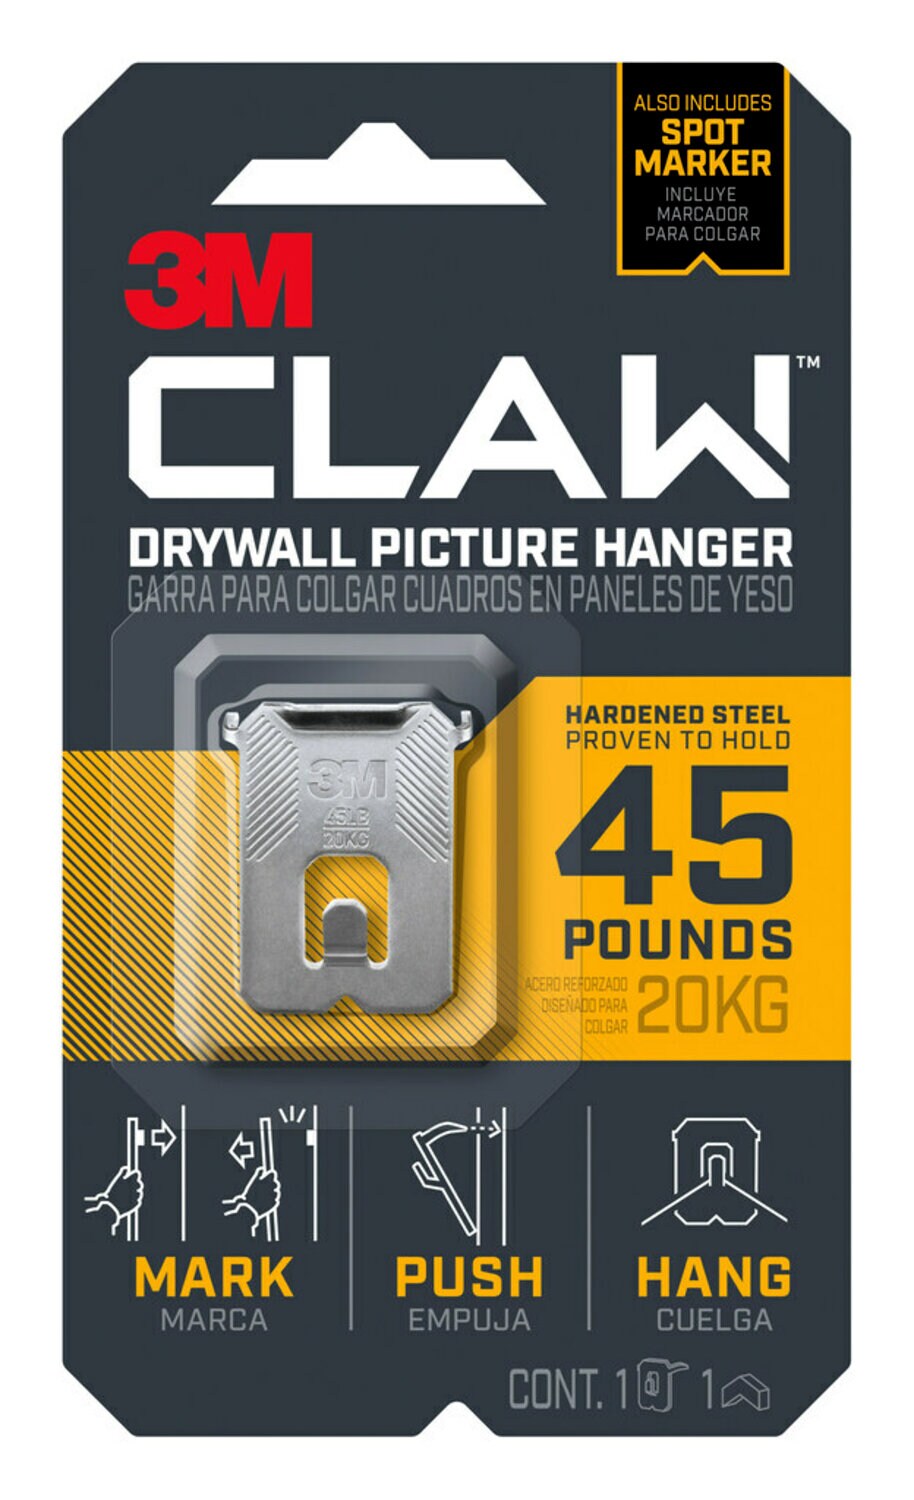 7100233242 - 3M CLAW Drywall Picture Hanger 45 lb with Temporary Spot Marker 3PH45M-1ES, 1 hanger, 1 marker